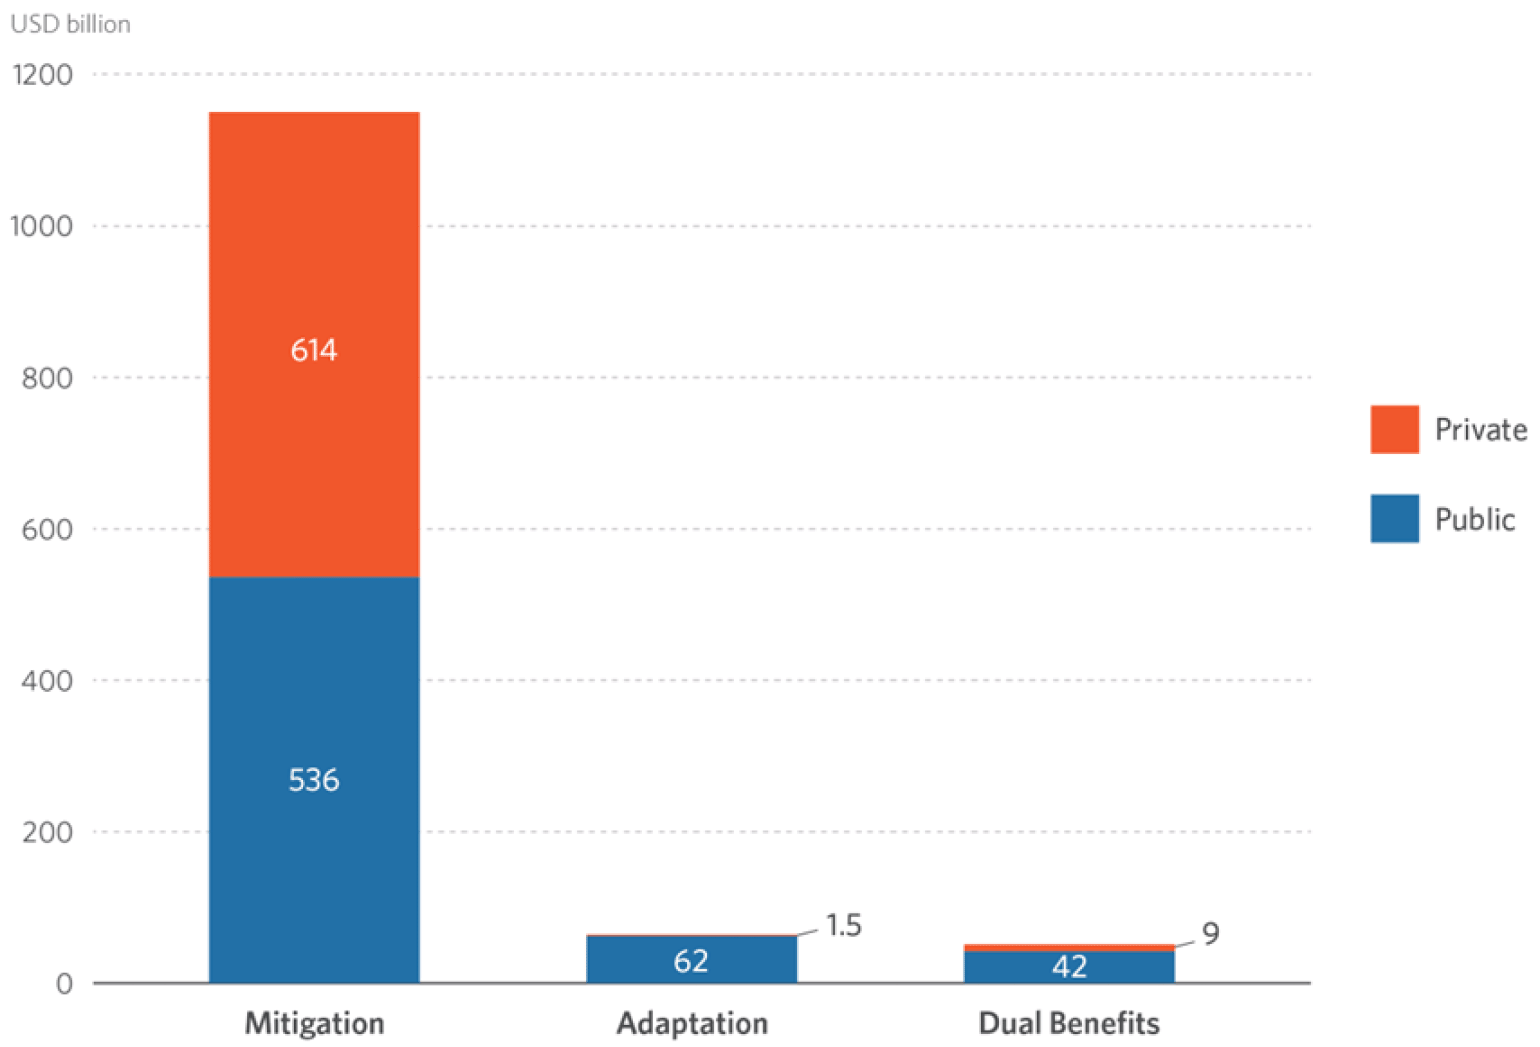 USD billion breakdown of climate finance spent on mitigation, adaptation or projects with dual benefit. For this the amount of spend which is 'private' or 'public' funds is outlined. Of the 1200 USB billion spent on mitigation, 614 billion of this was private finance. In comparison to Adaptation were only 1.5 billion is 'private spend'.